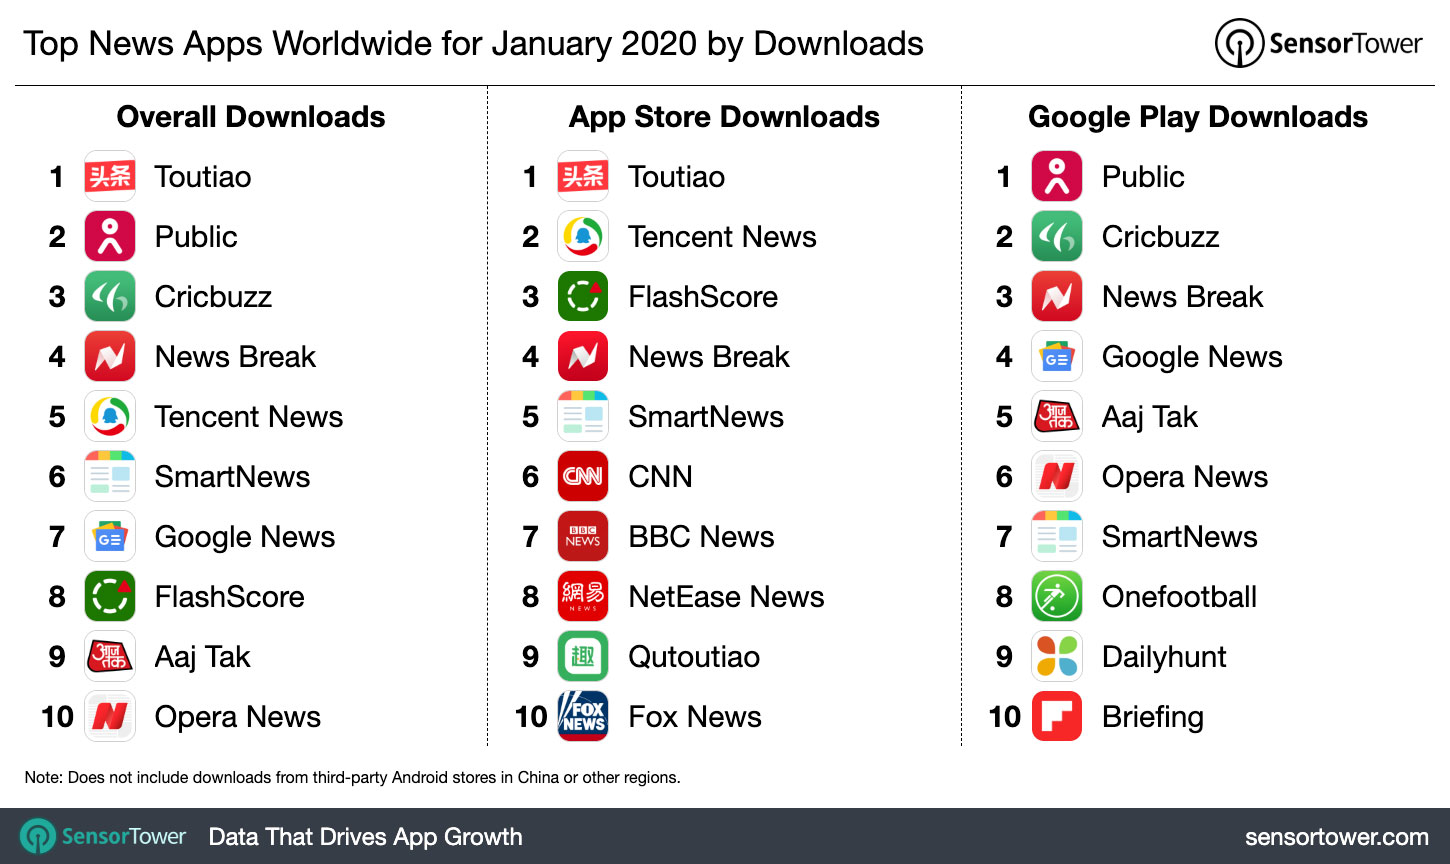 Top News Apps Worldwide for January 2020 by Downloads